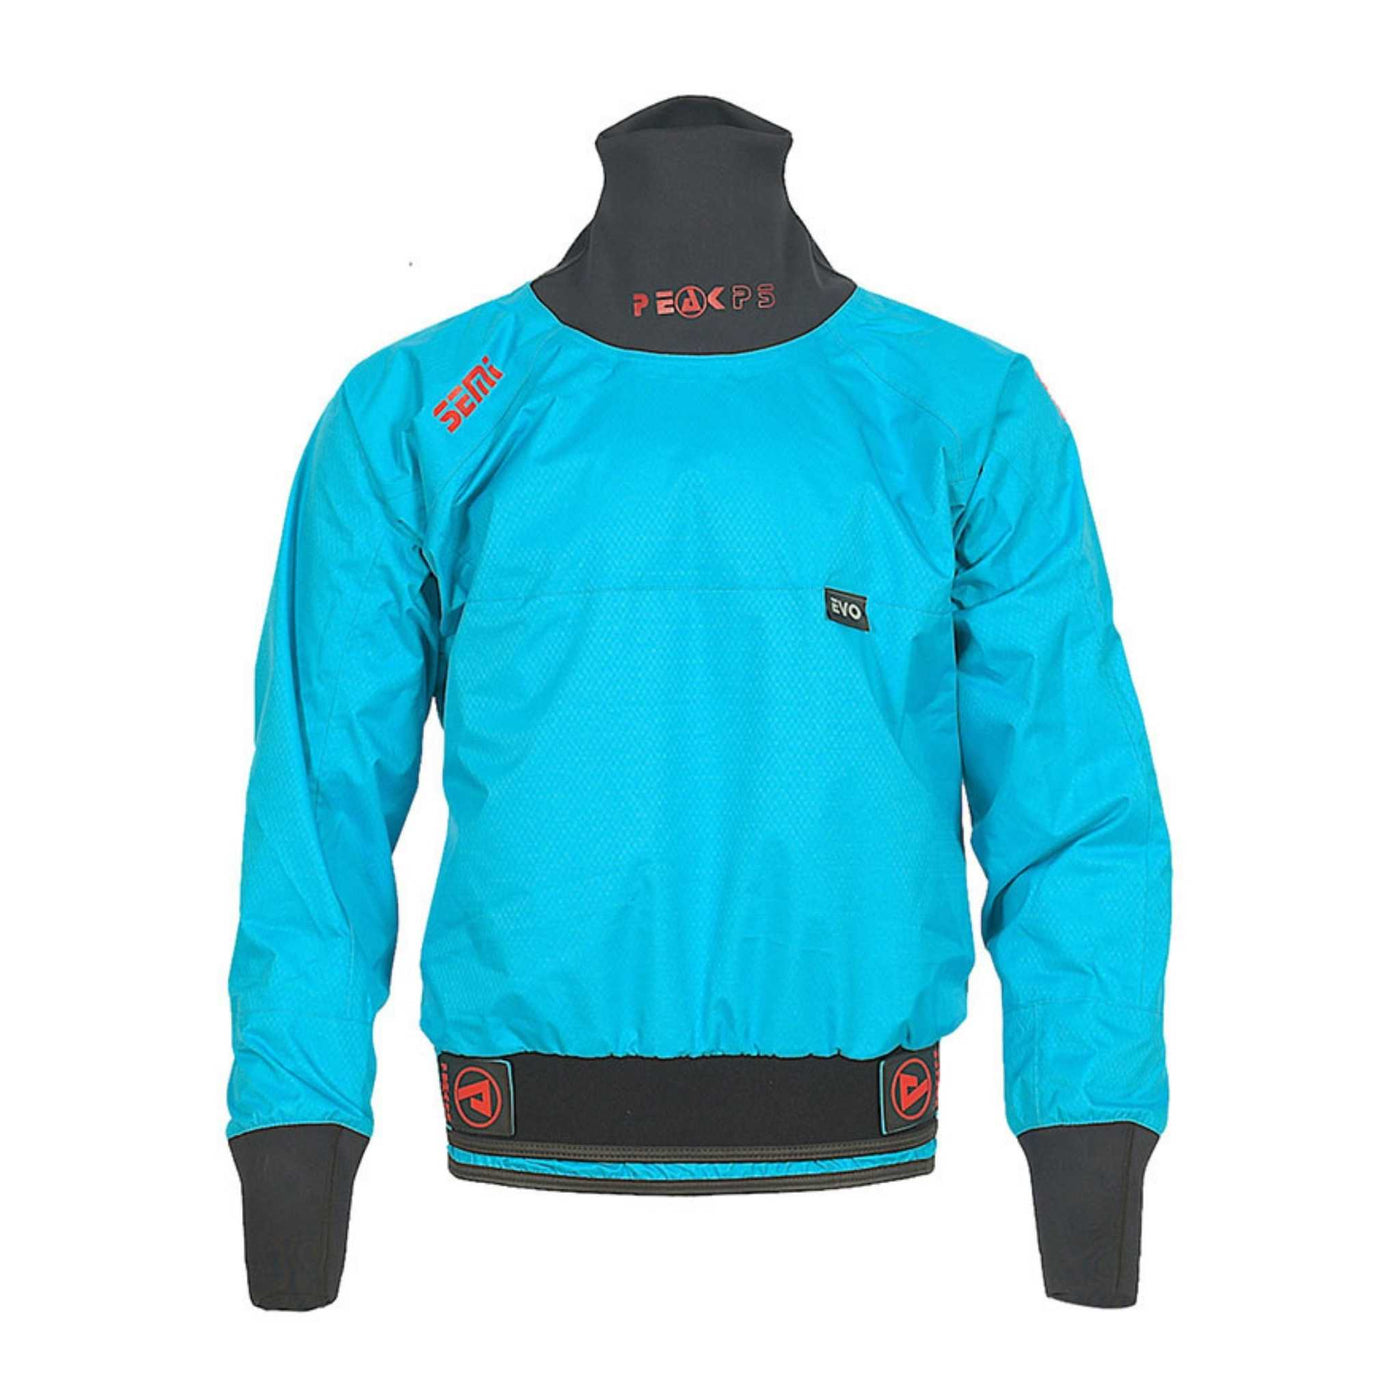 Peak PS Semi Dry Long Paddle Jacket | Whitewater Kayak Paddle Jacket | Further Faster Christchurch NZ #blue-pps